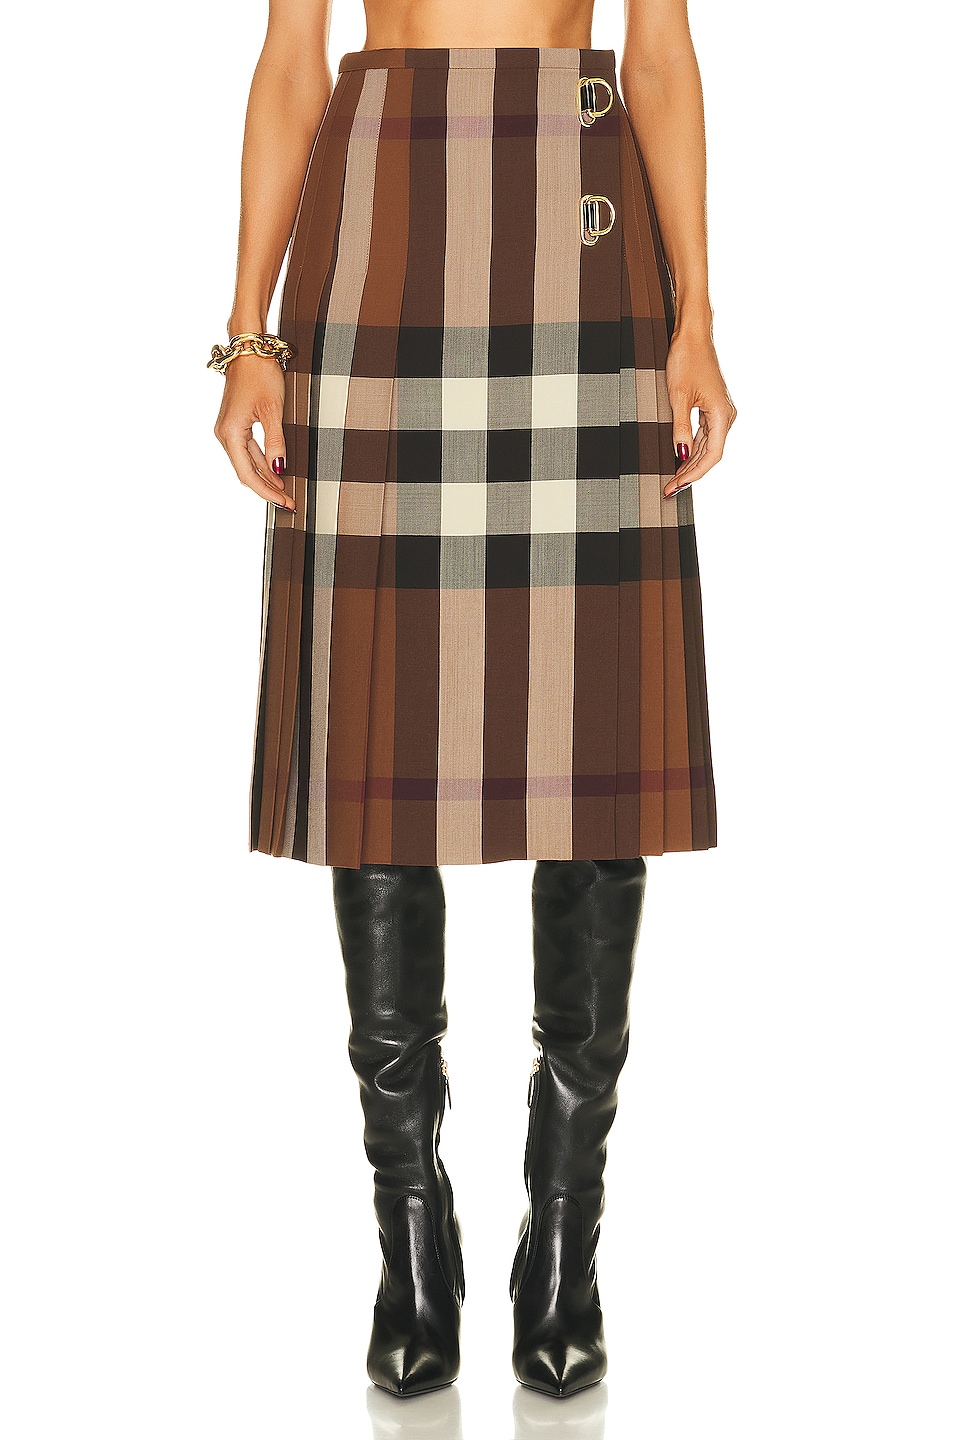 Image 1 of Burberry Winifred Check Skirt in Dark Birch Brown Check